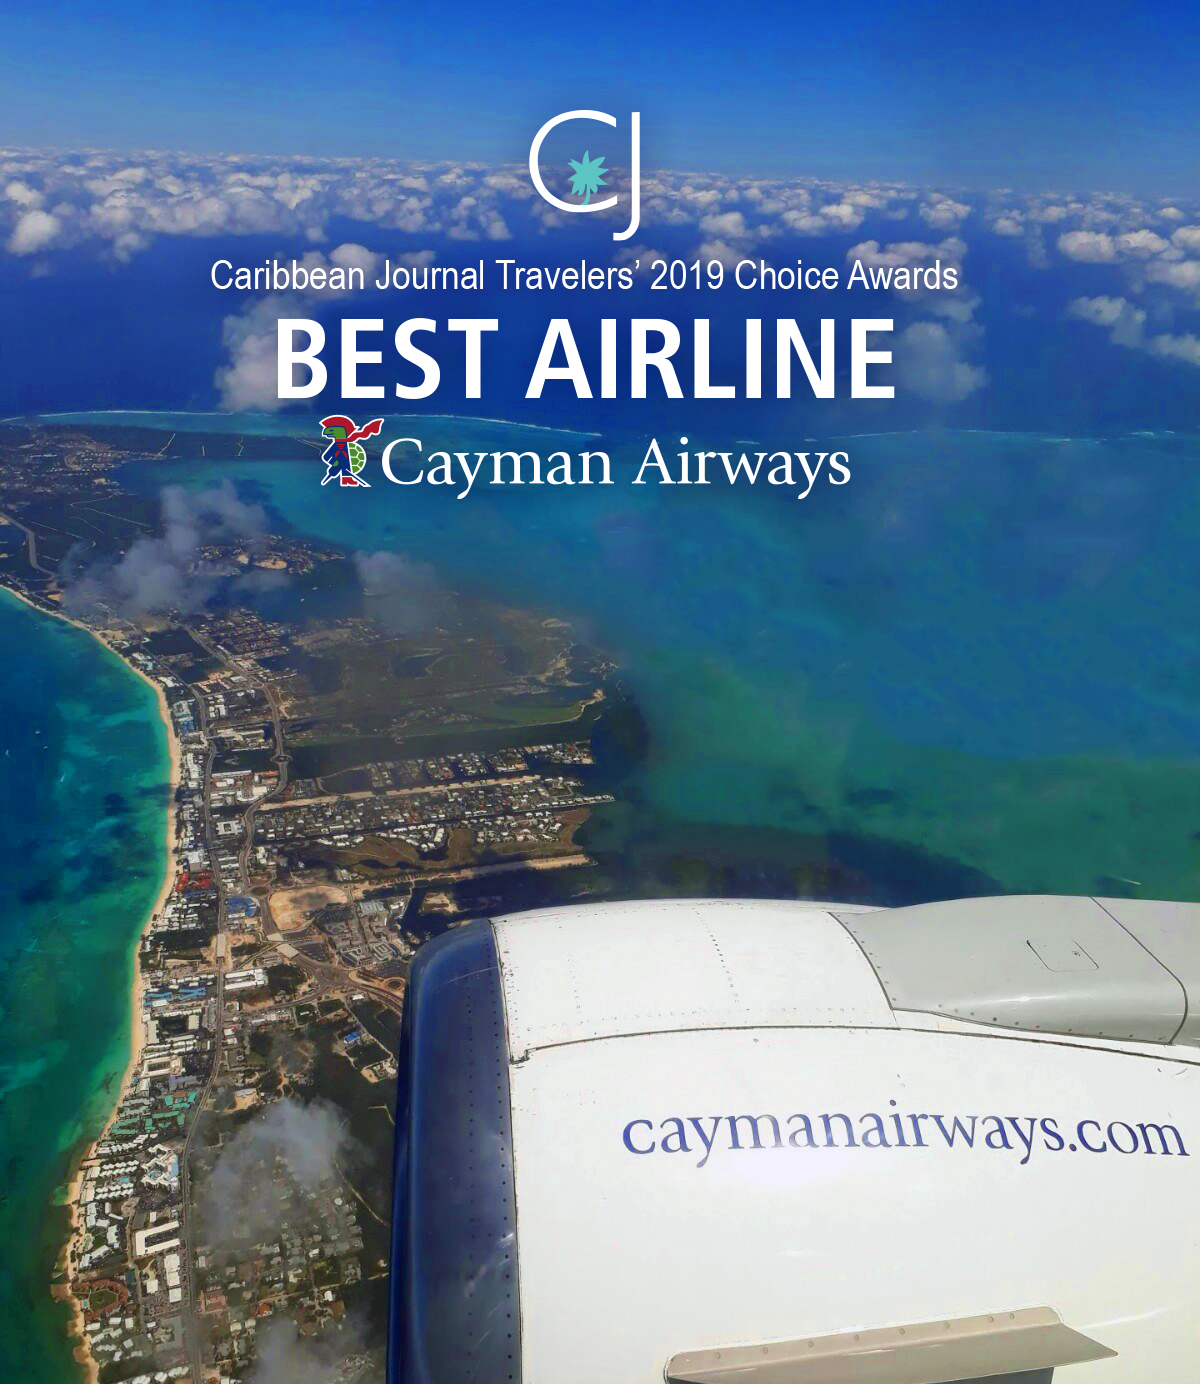 Cayman Airways named Best Airline 2019 by Caribbean Journal